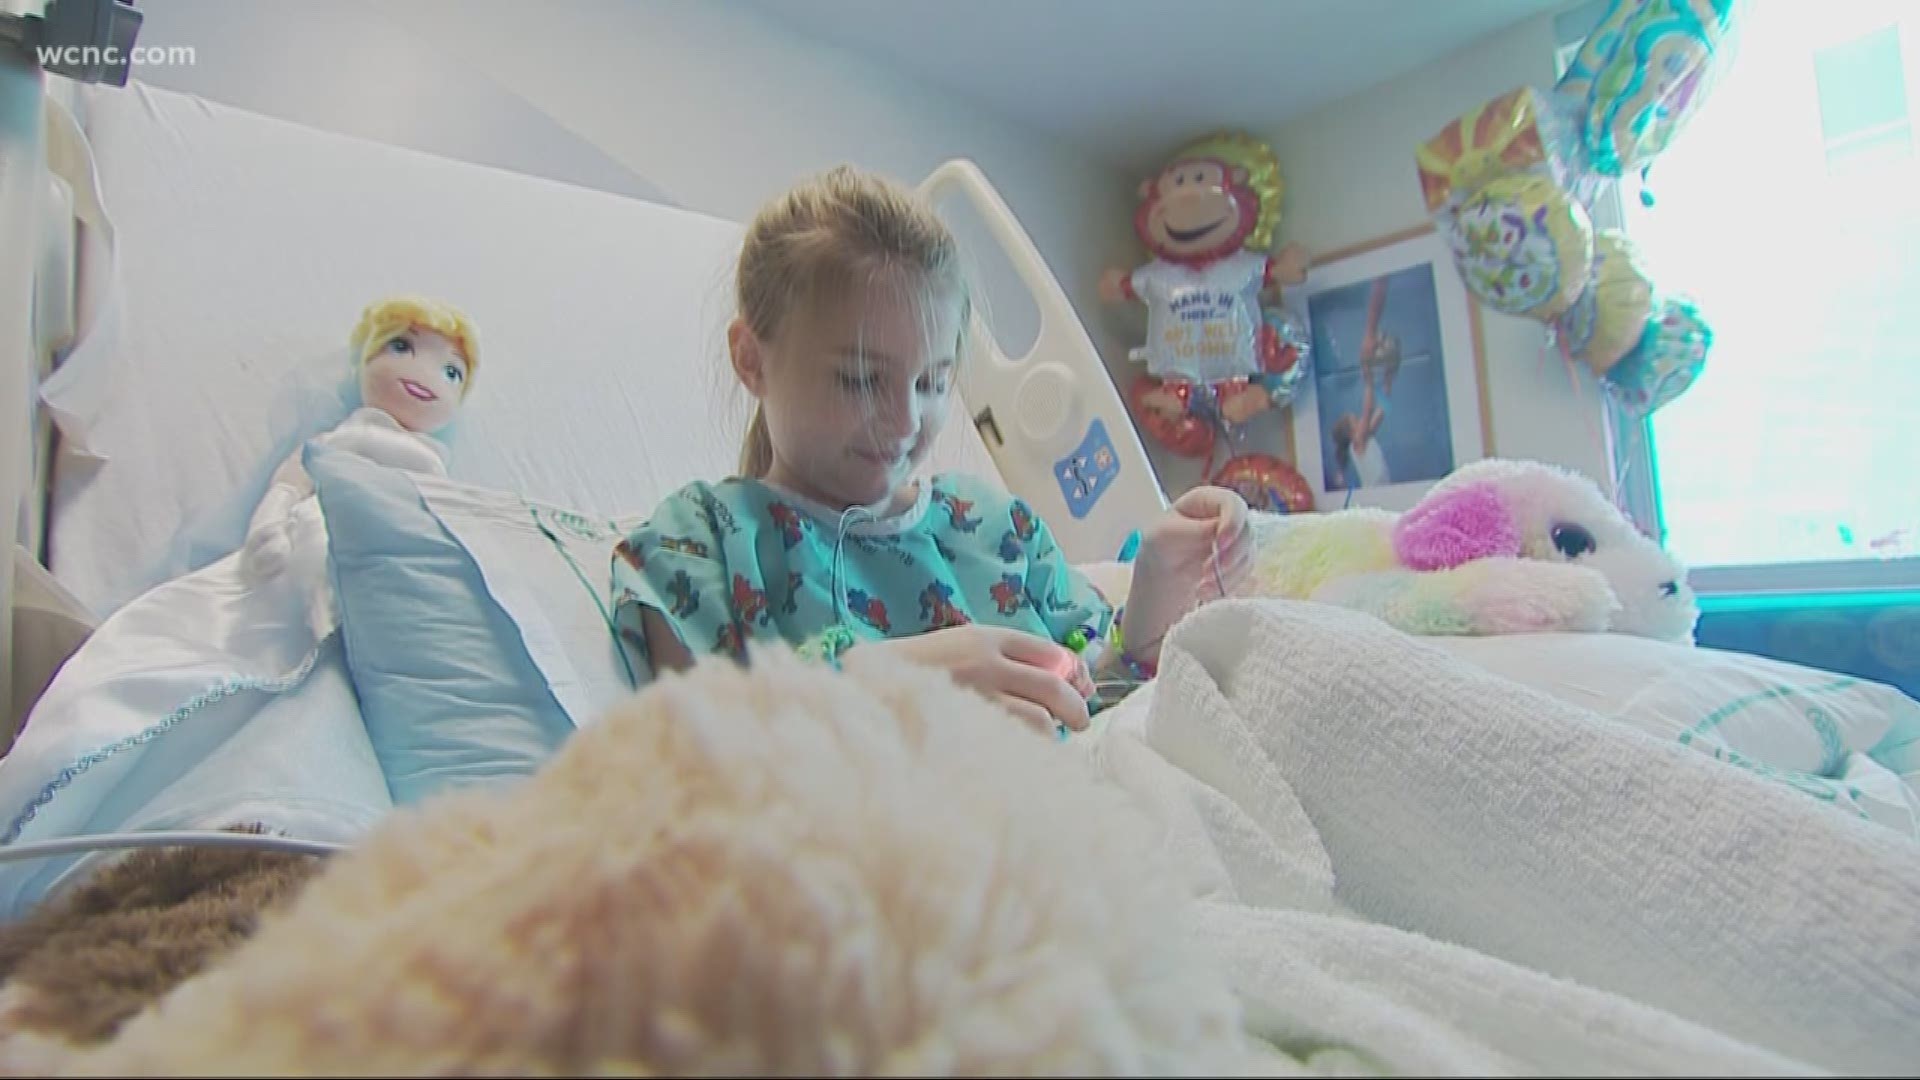 One Charlotte family is sharing their daughter's story after she's spent the last month in the hospital from flu-related complications.